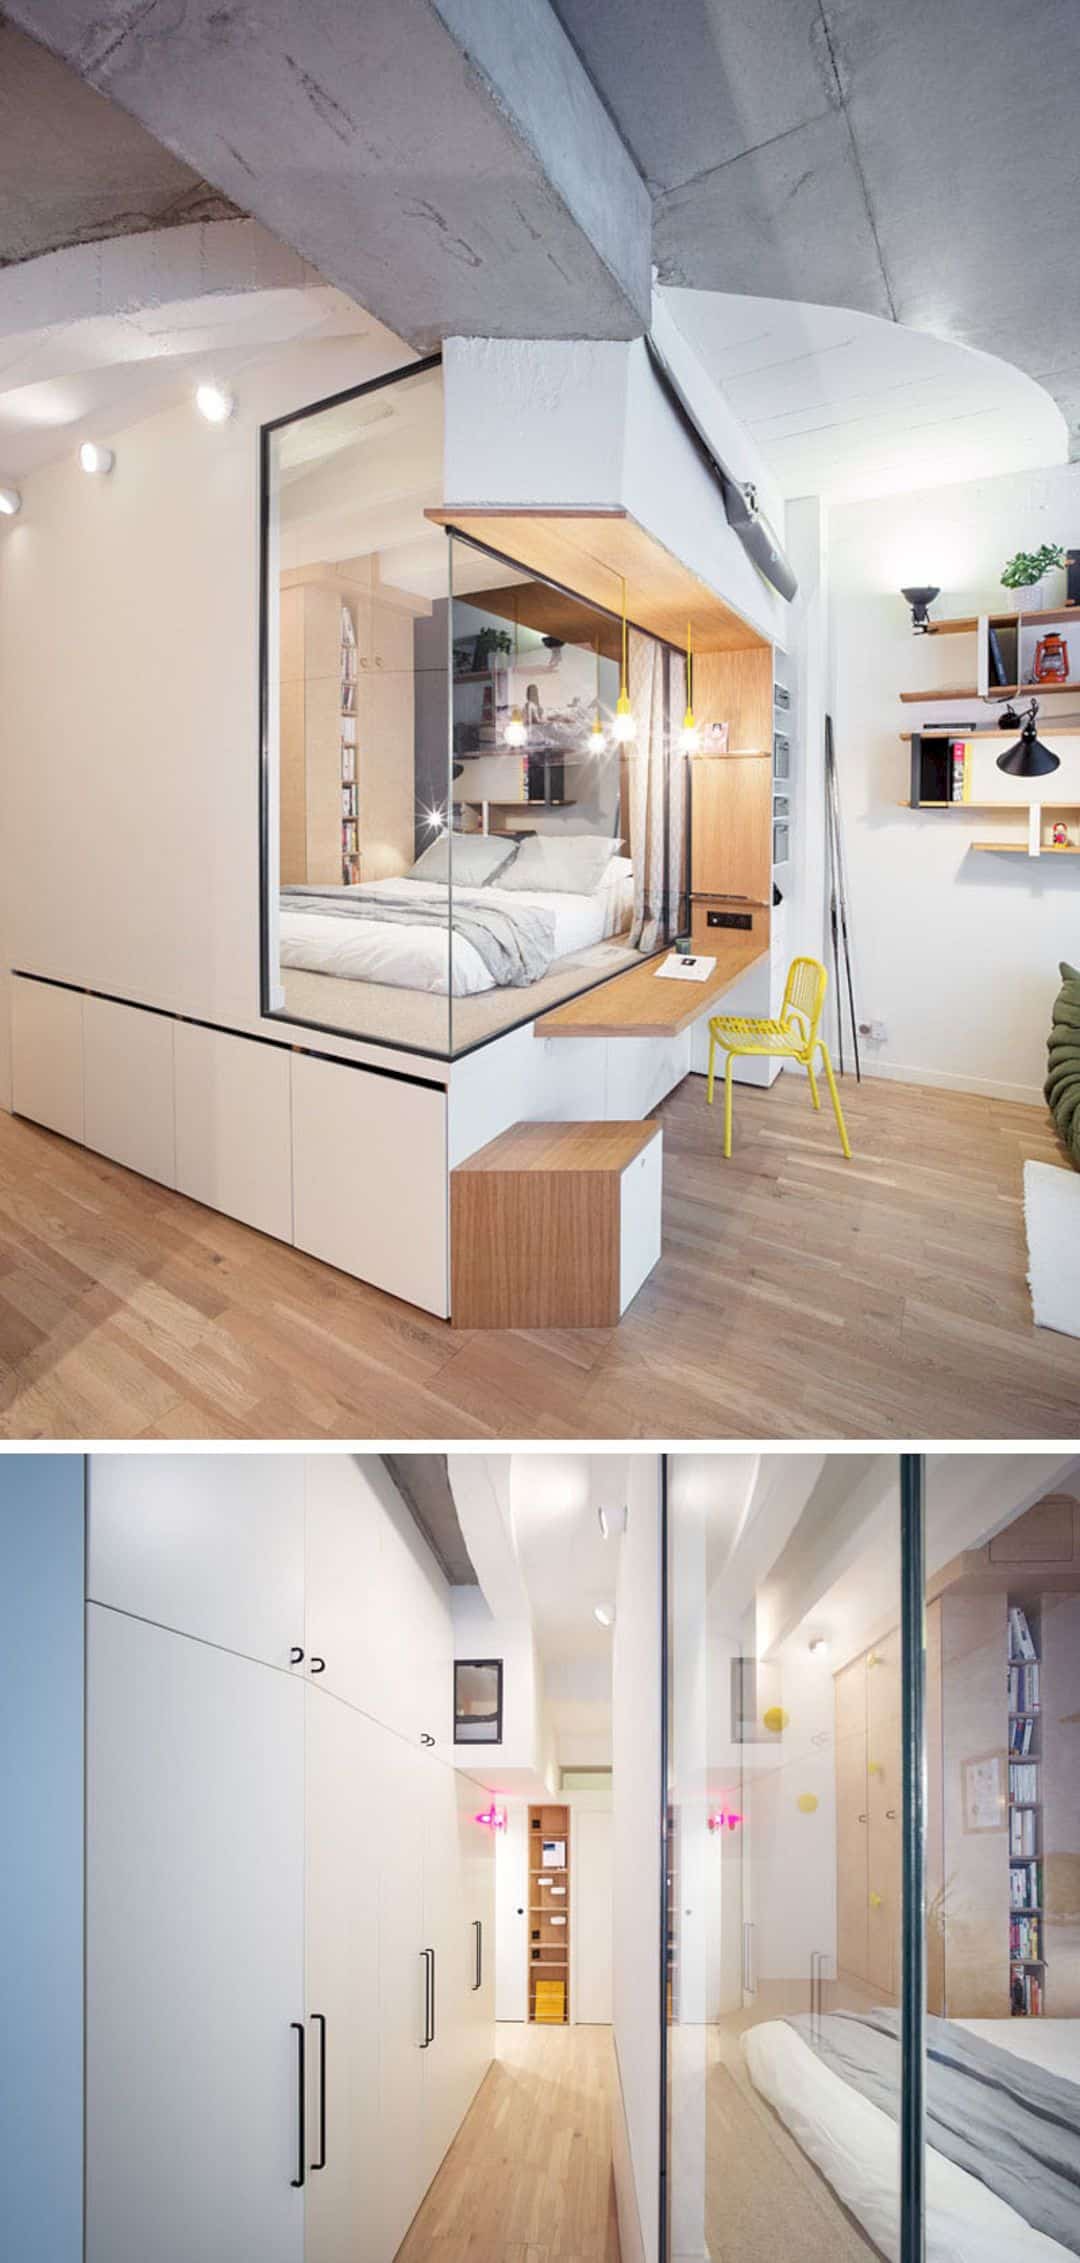 A Modern Family Apartment With Creative Small Space Solutions 8